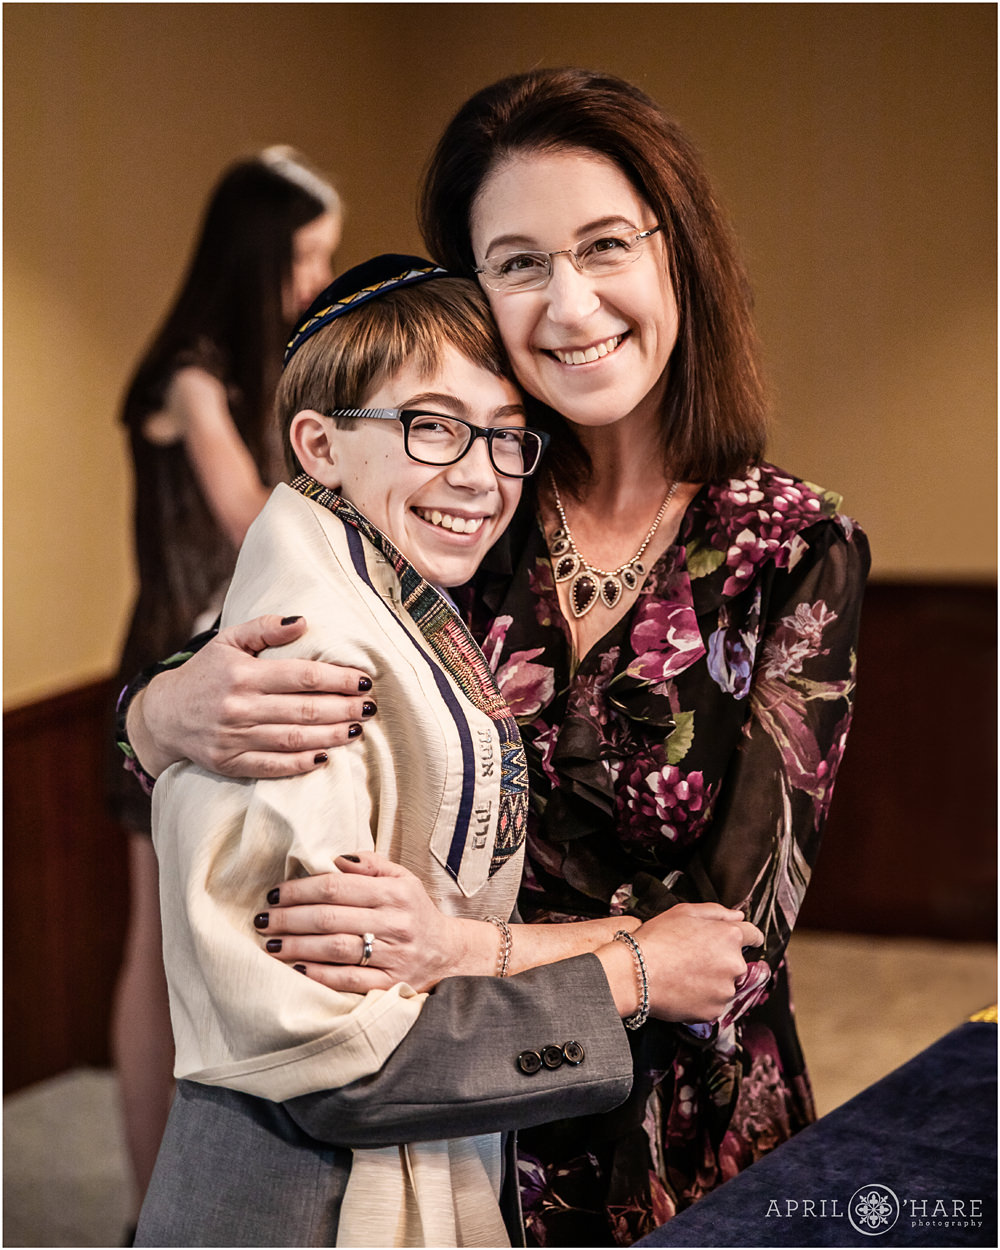 Mom hugs her son on the day of his bar mitzvah in Fort Collins Colorado